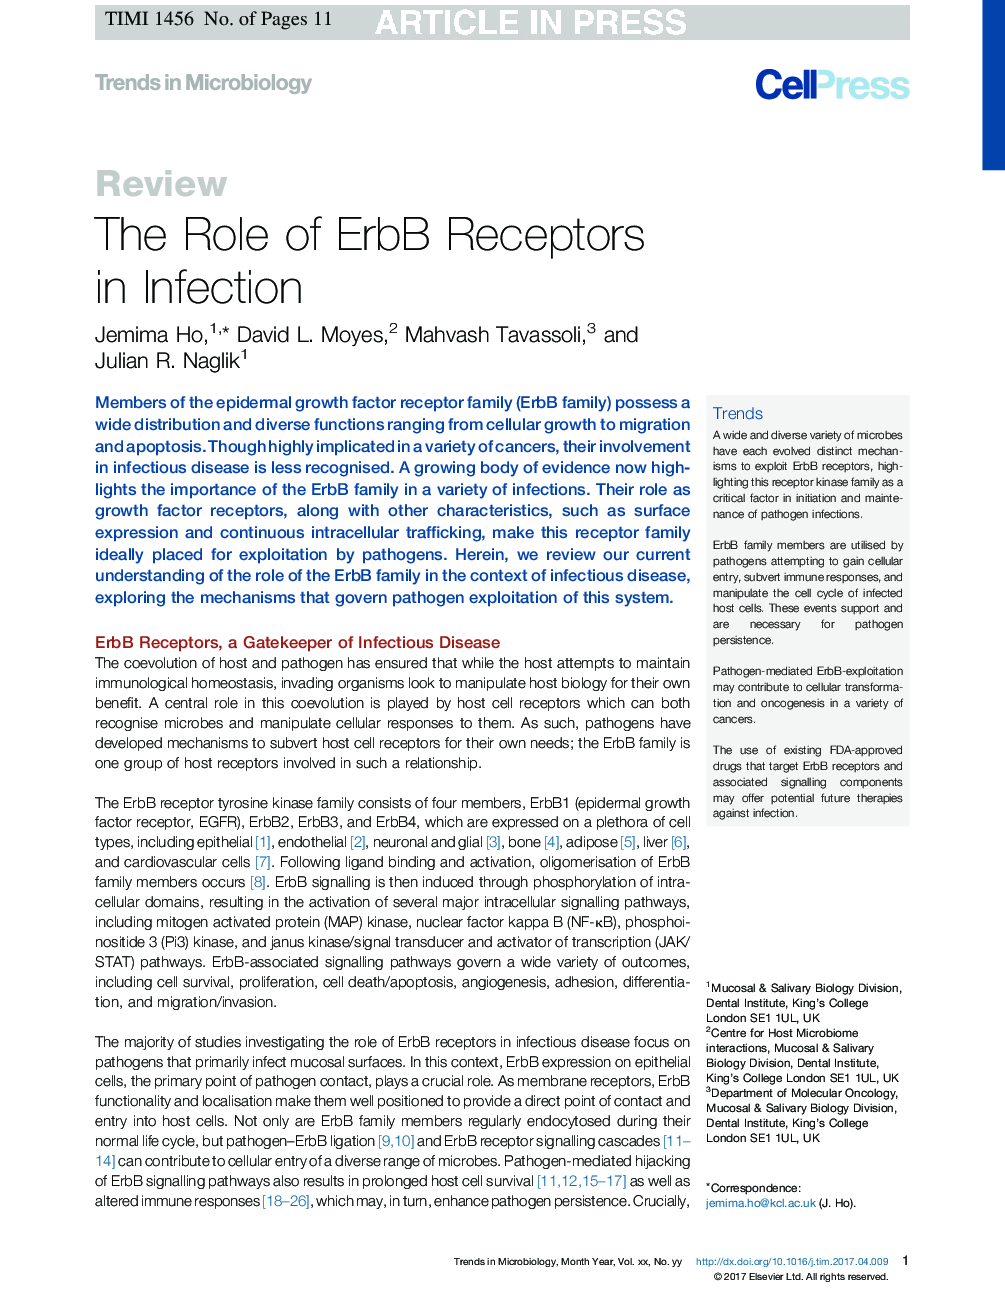 The Role of ErbB Receptors in Infection